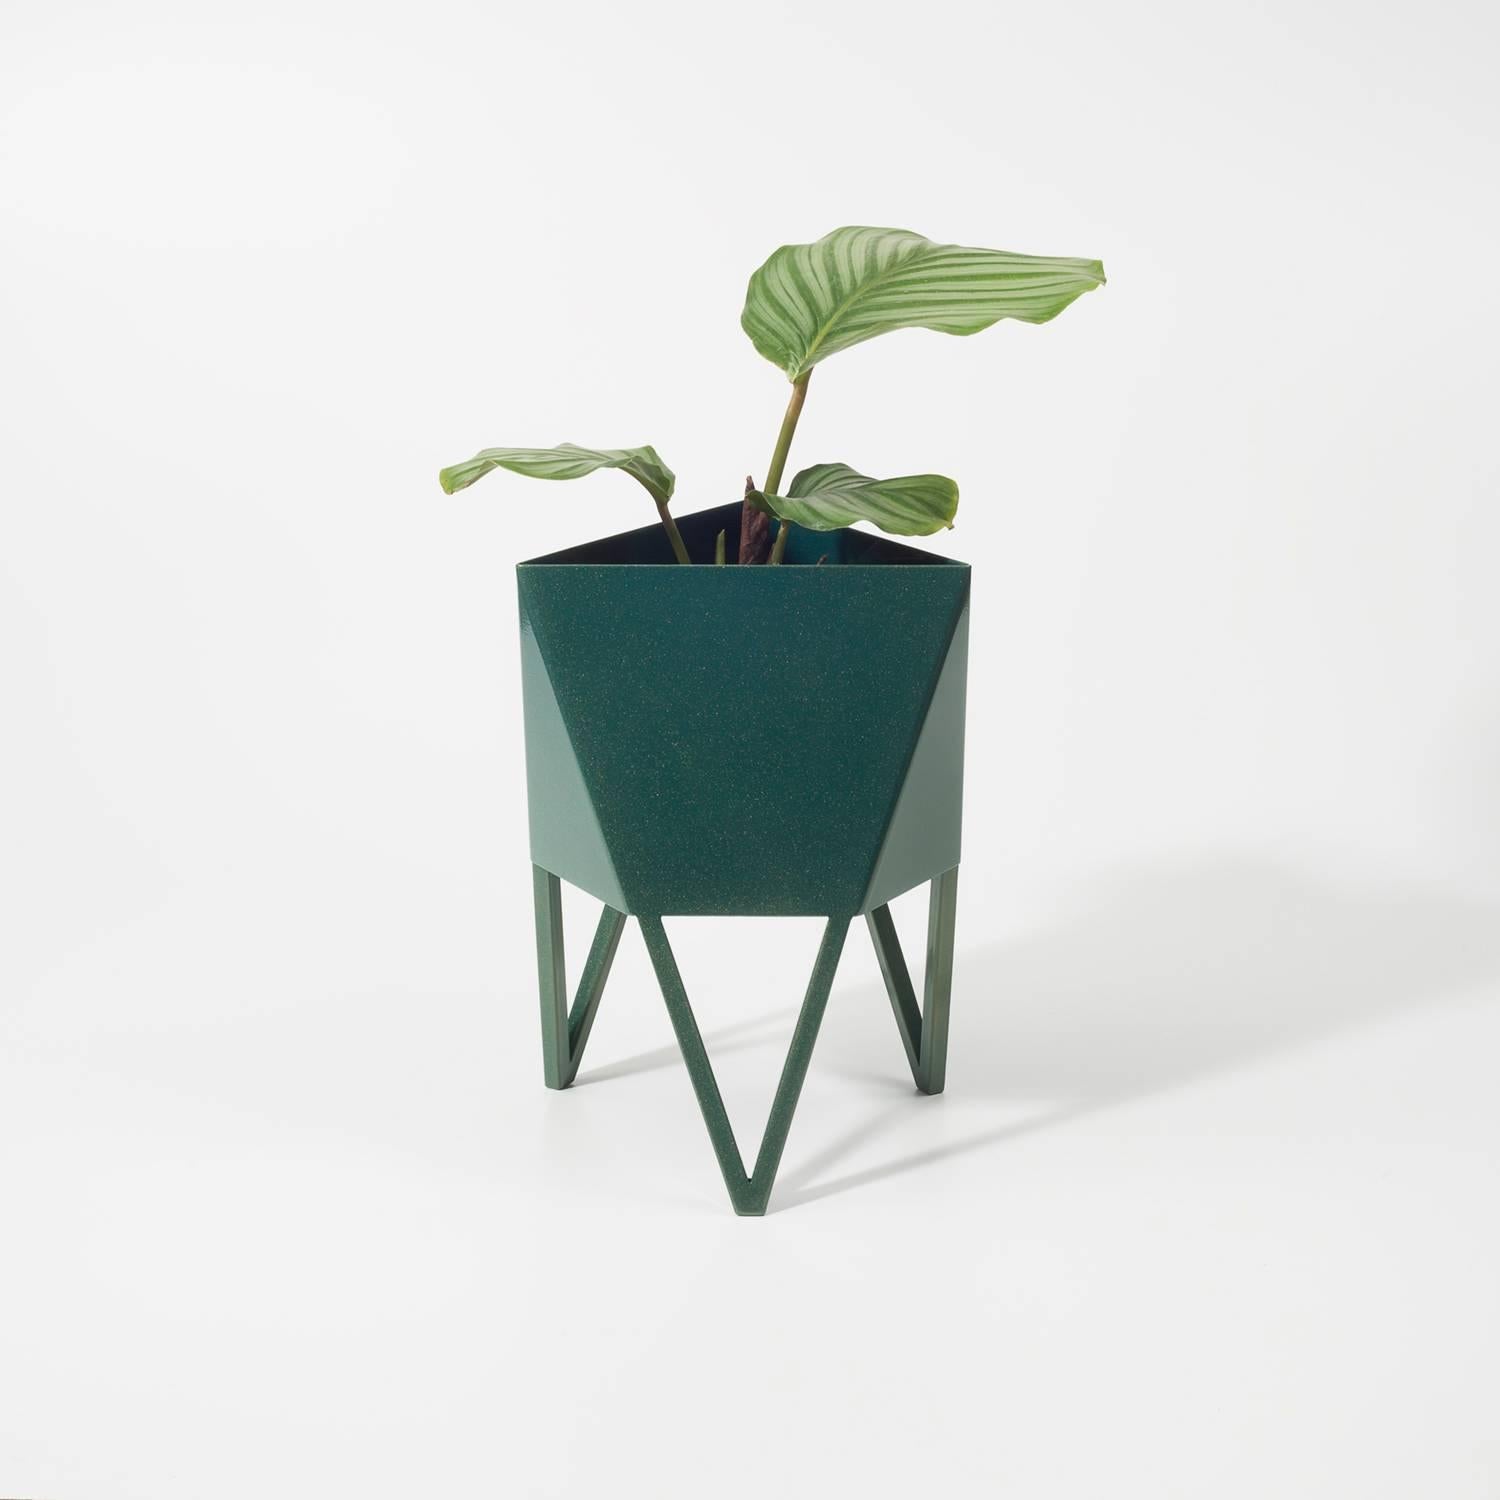 Contemporary Deca Planter in Flat Black Steel, Small, by Force/Collide